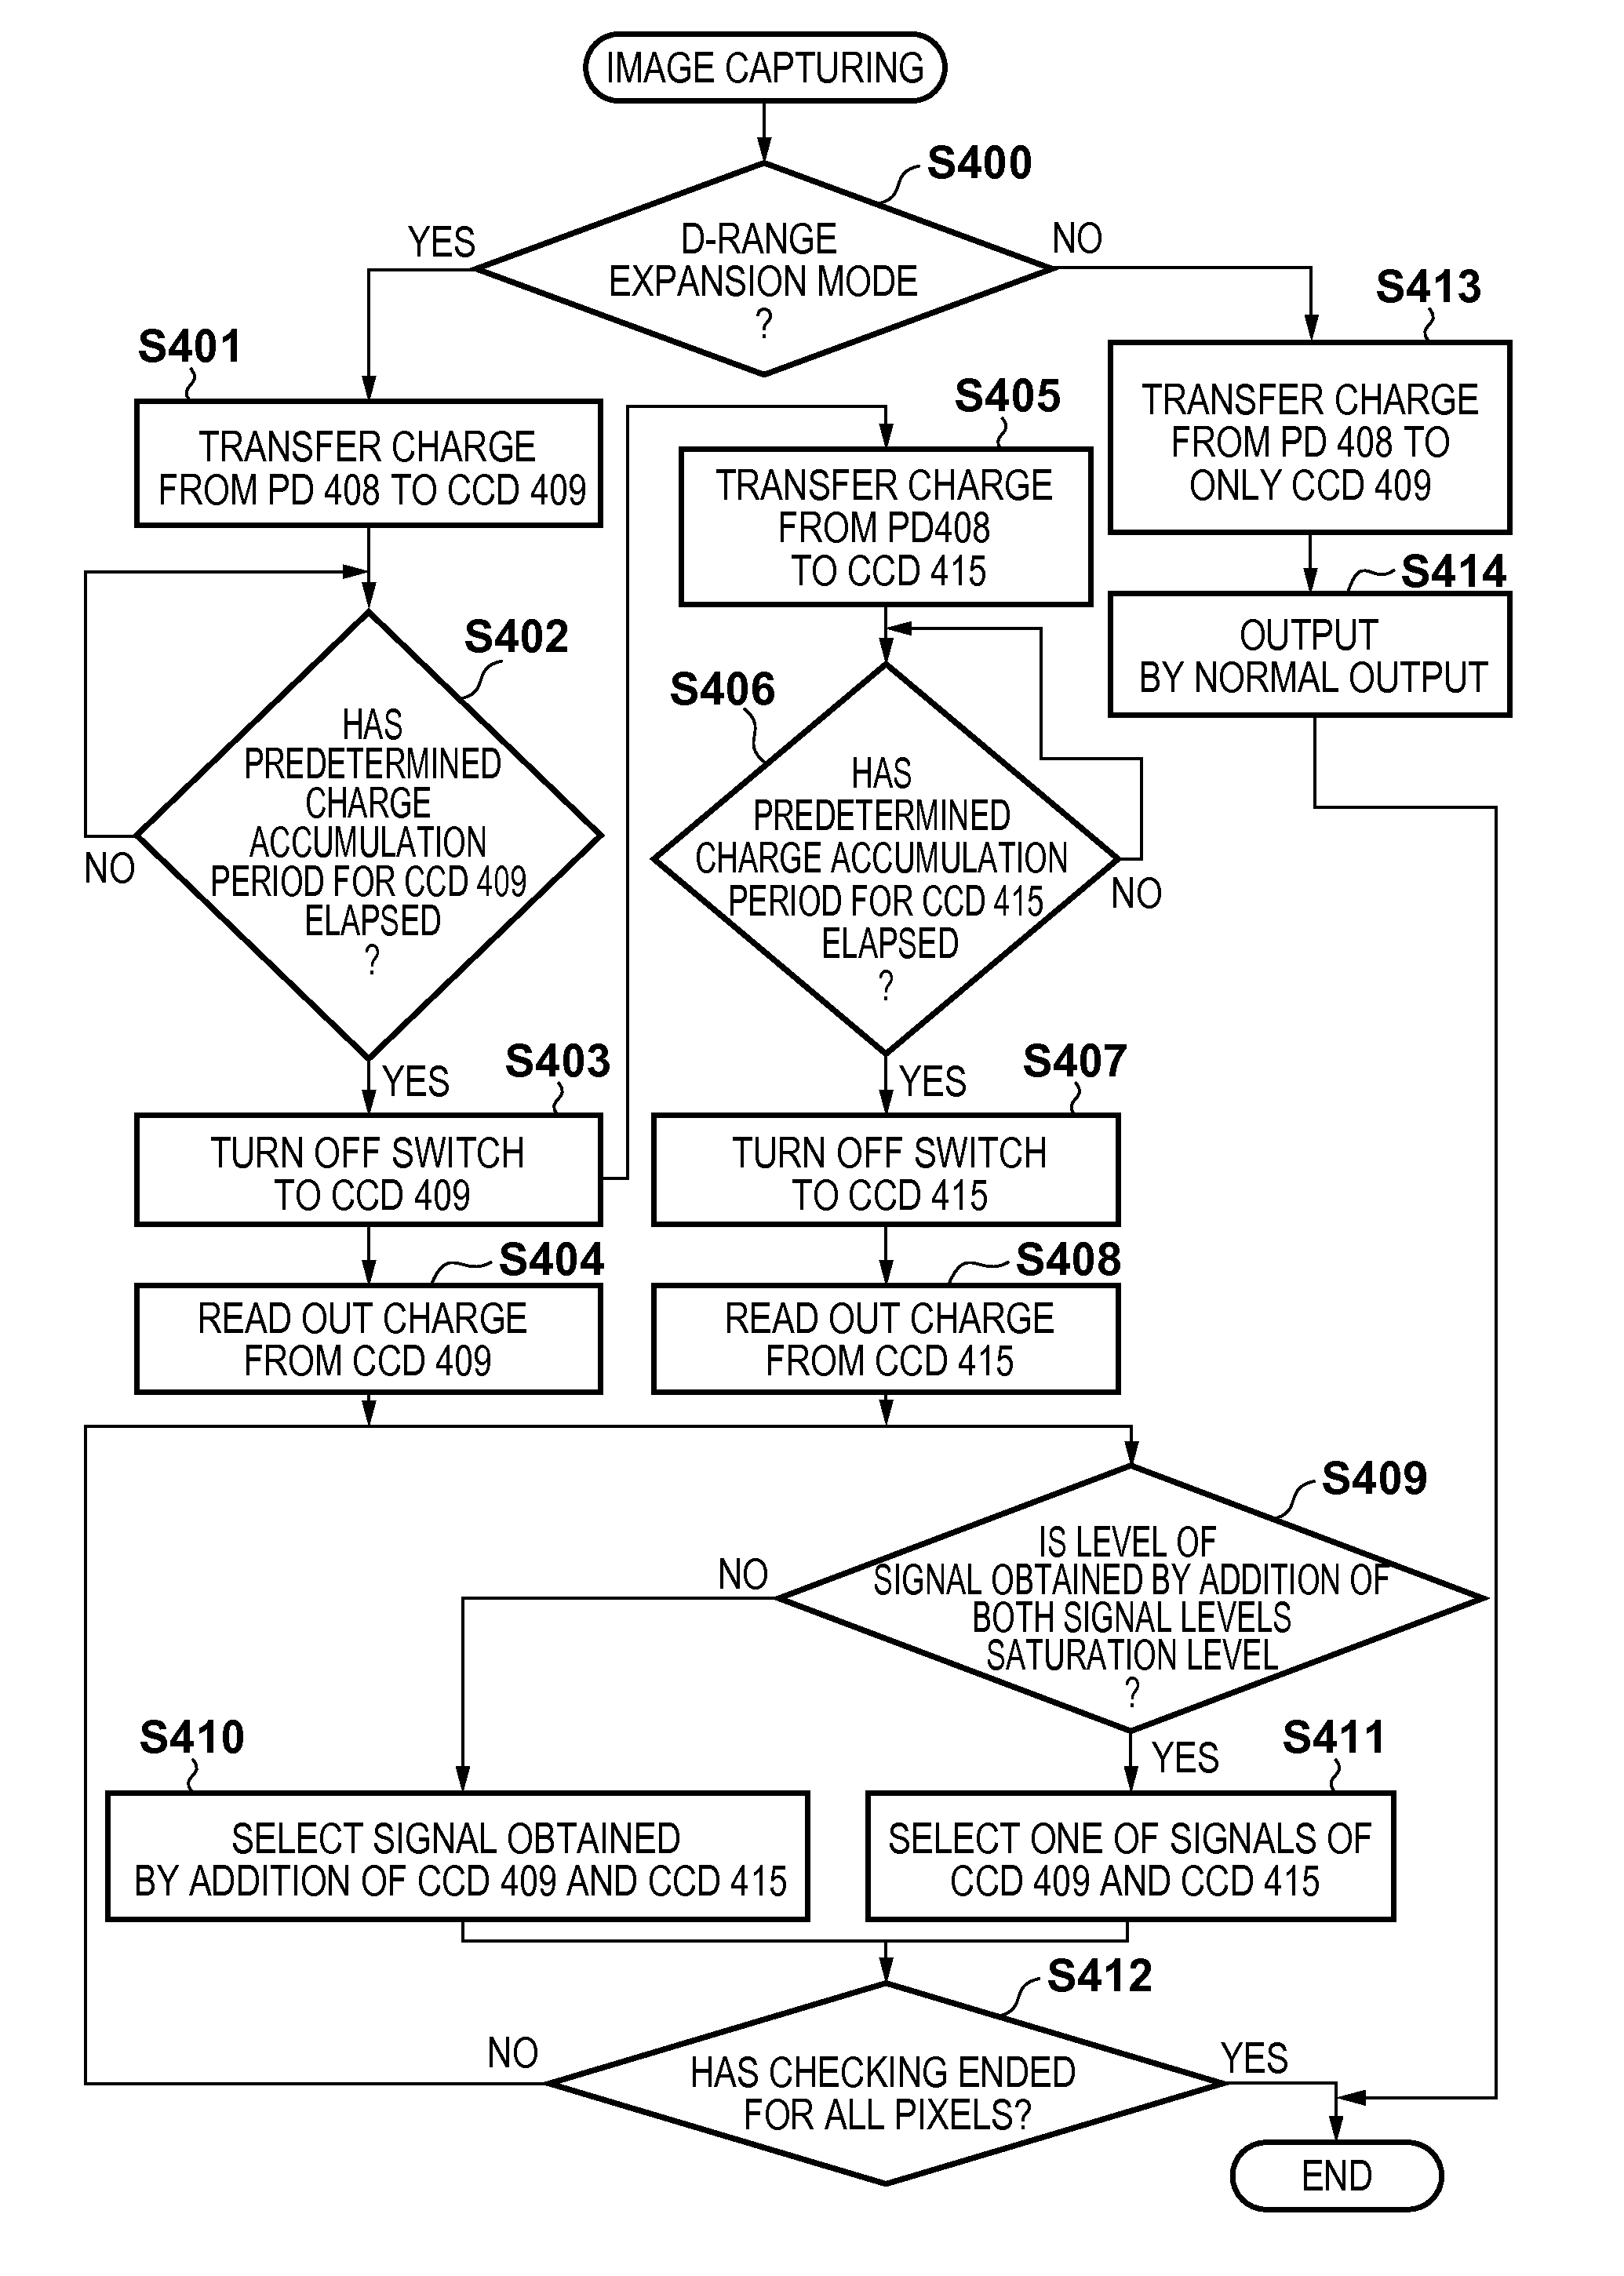 Image capturing apparatus and method for controlling the image capturing apparatus